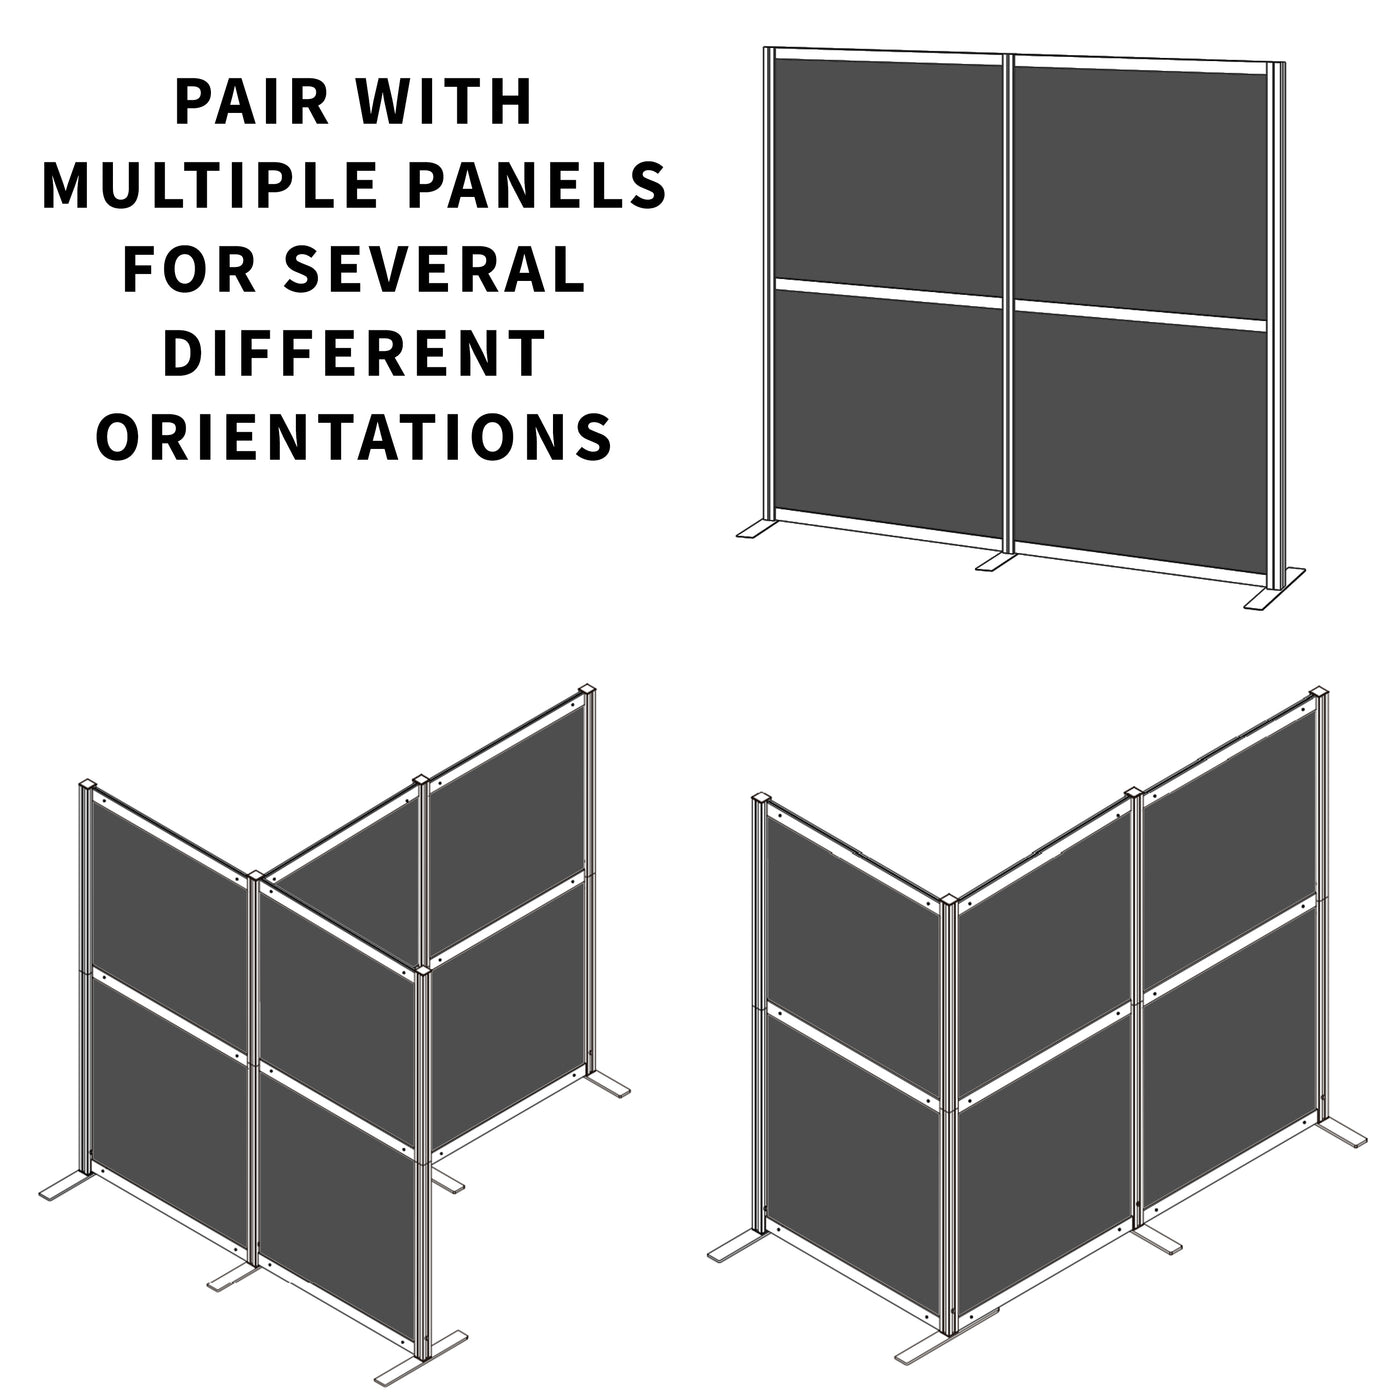 Pair sets of panels together for a more customization setup.